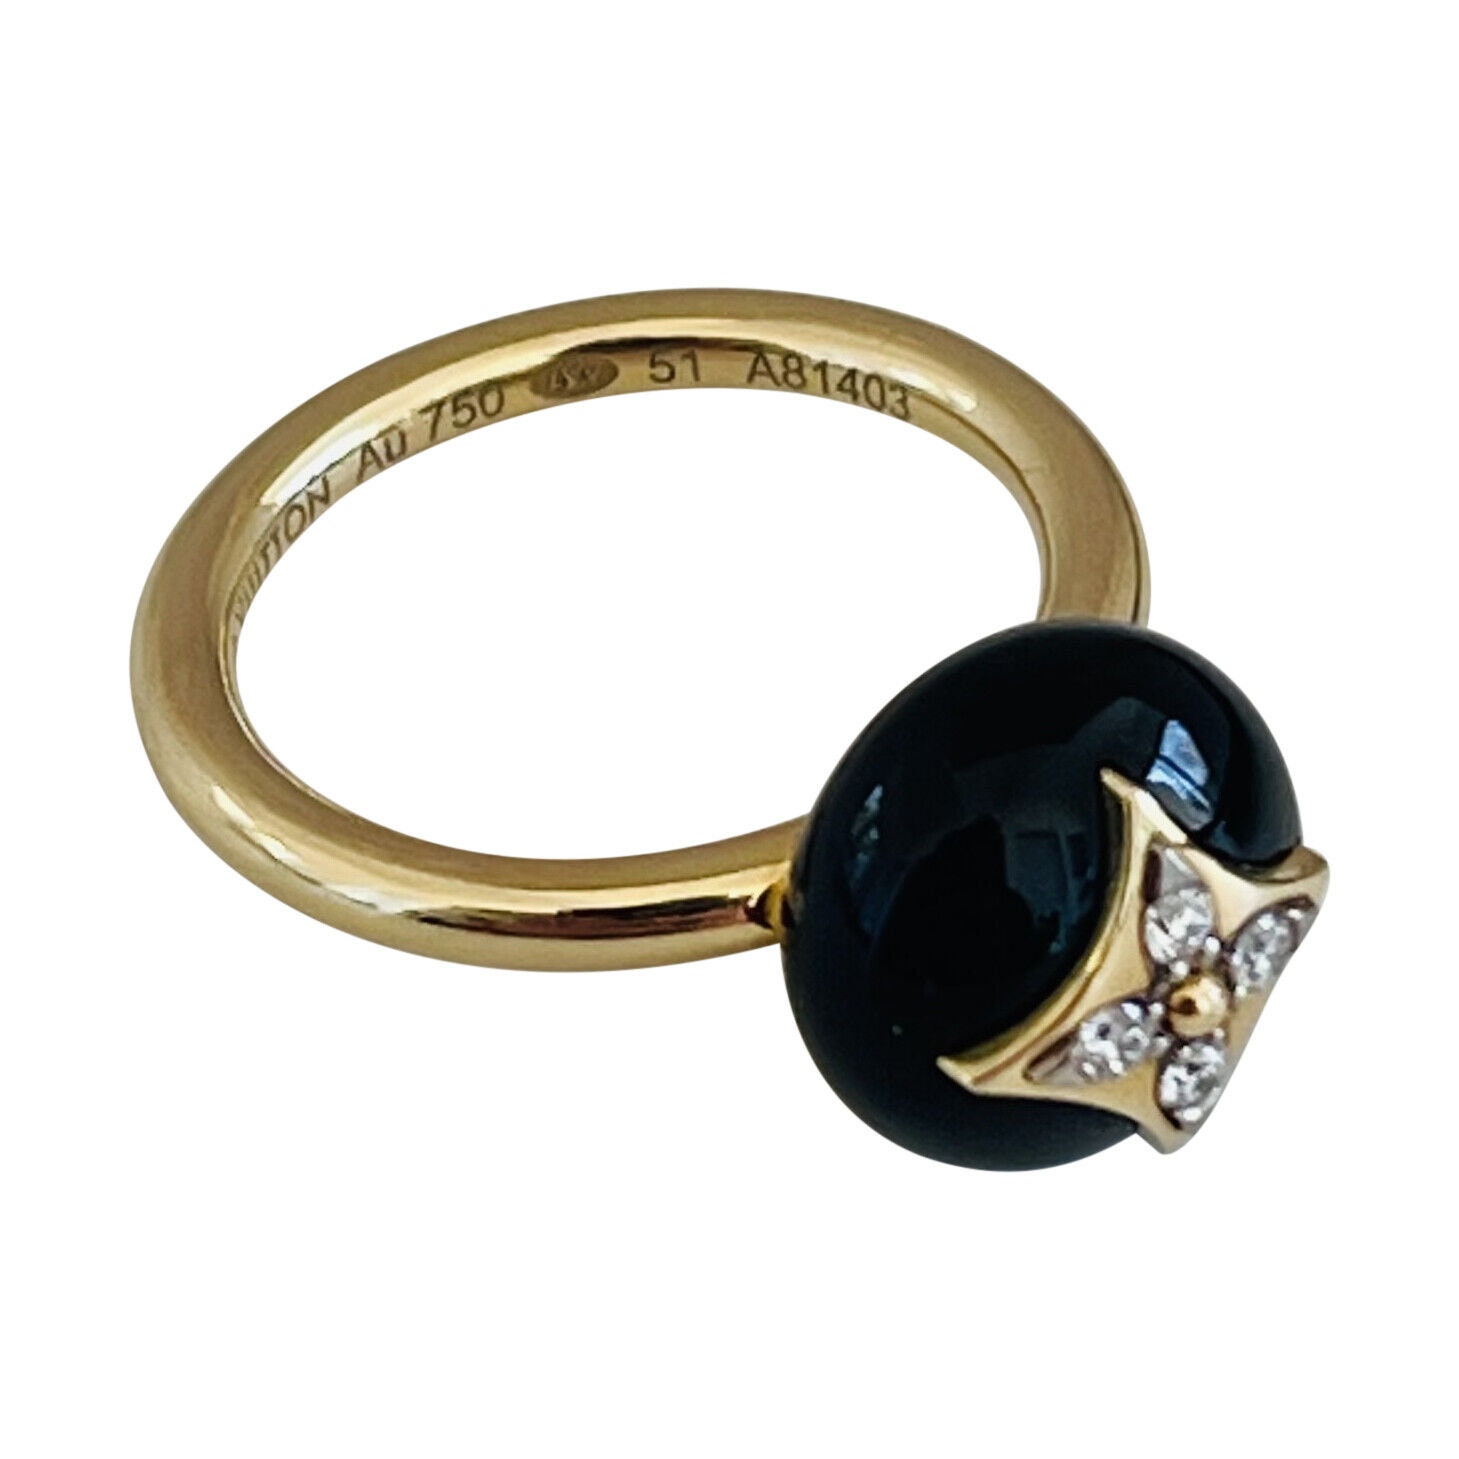 Louis Vuitton Color Blossom Ring, Yellow and White Gold, Onyx and Diamonds Gold. Size 48